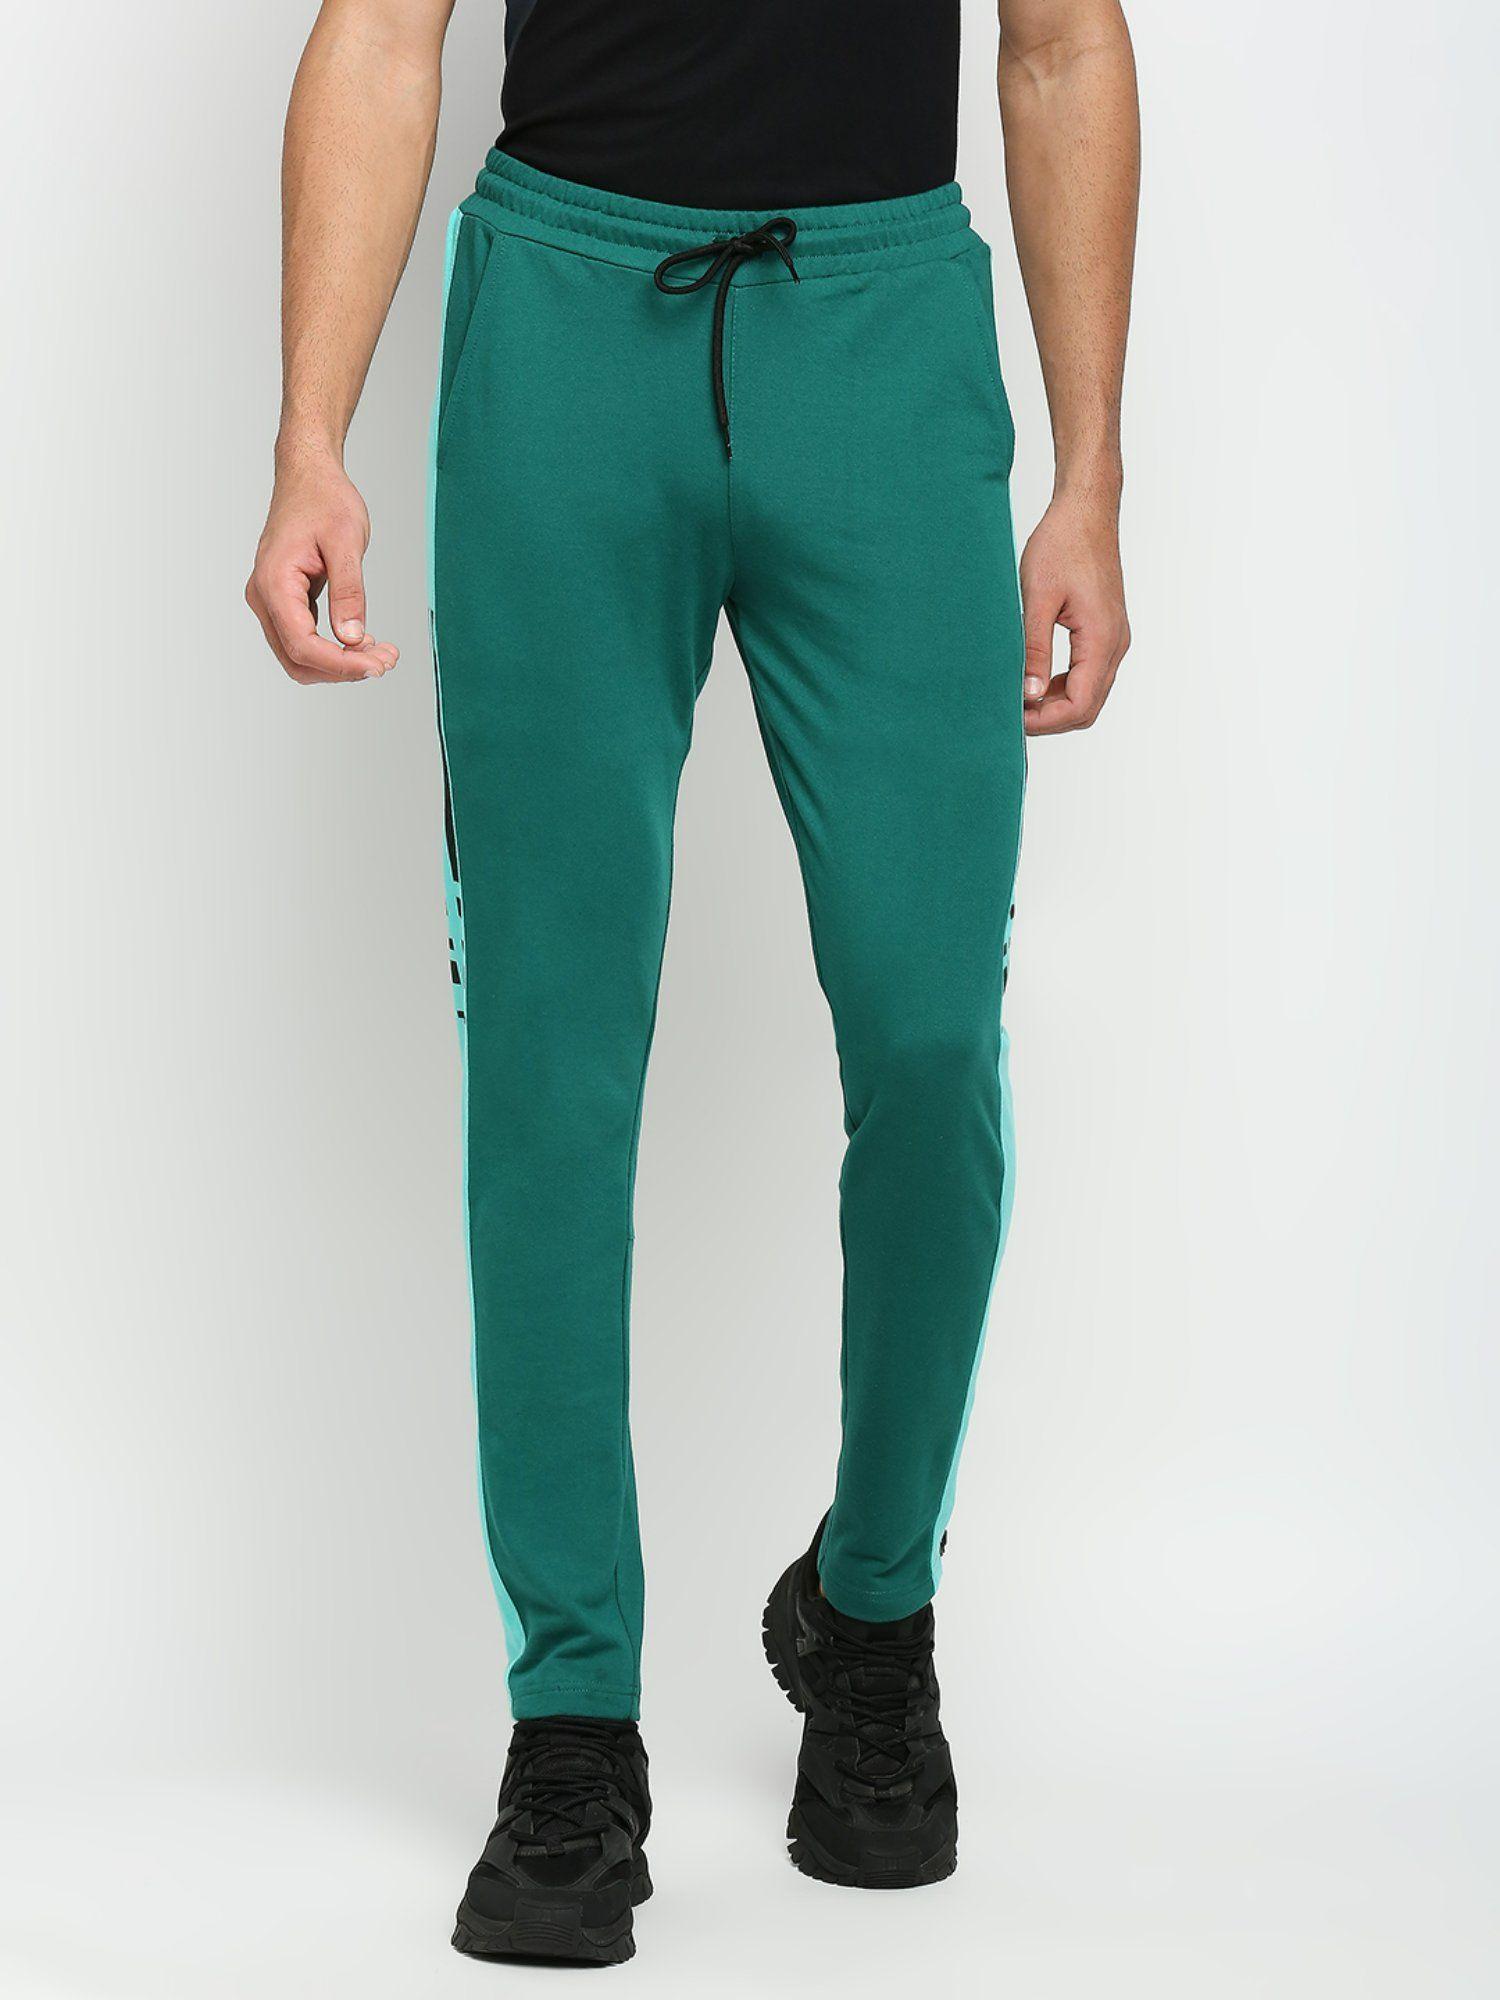 cotton polyester slim fit french terry knit joggers for mens - green